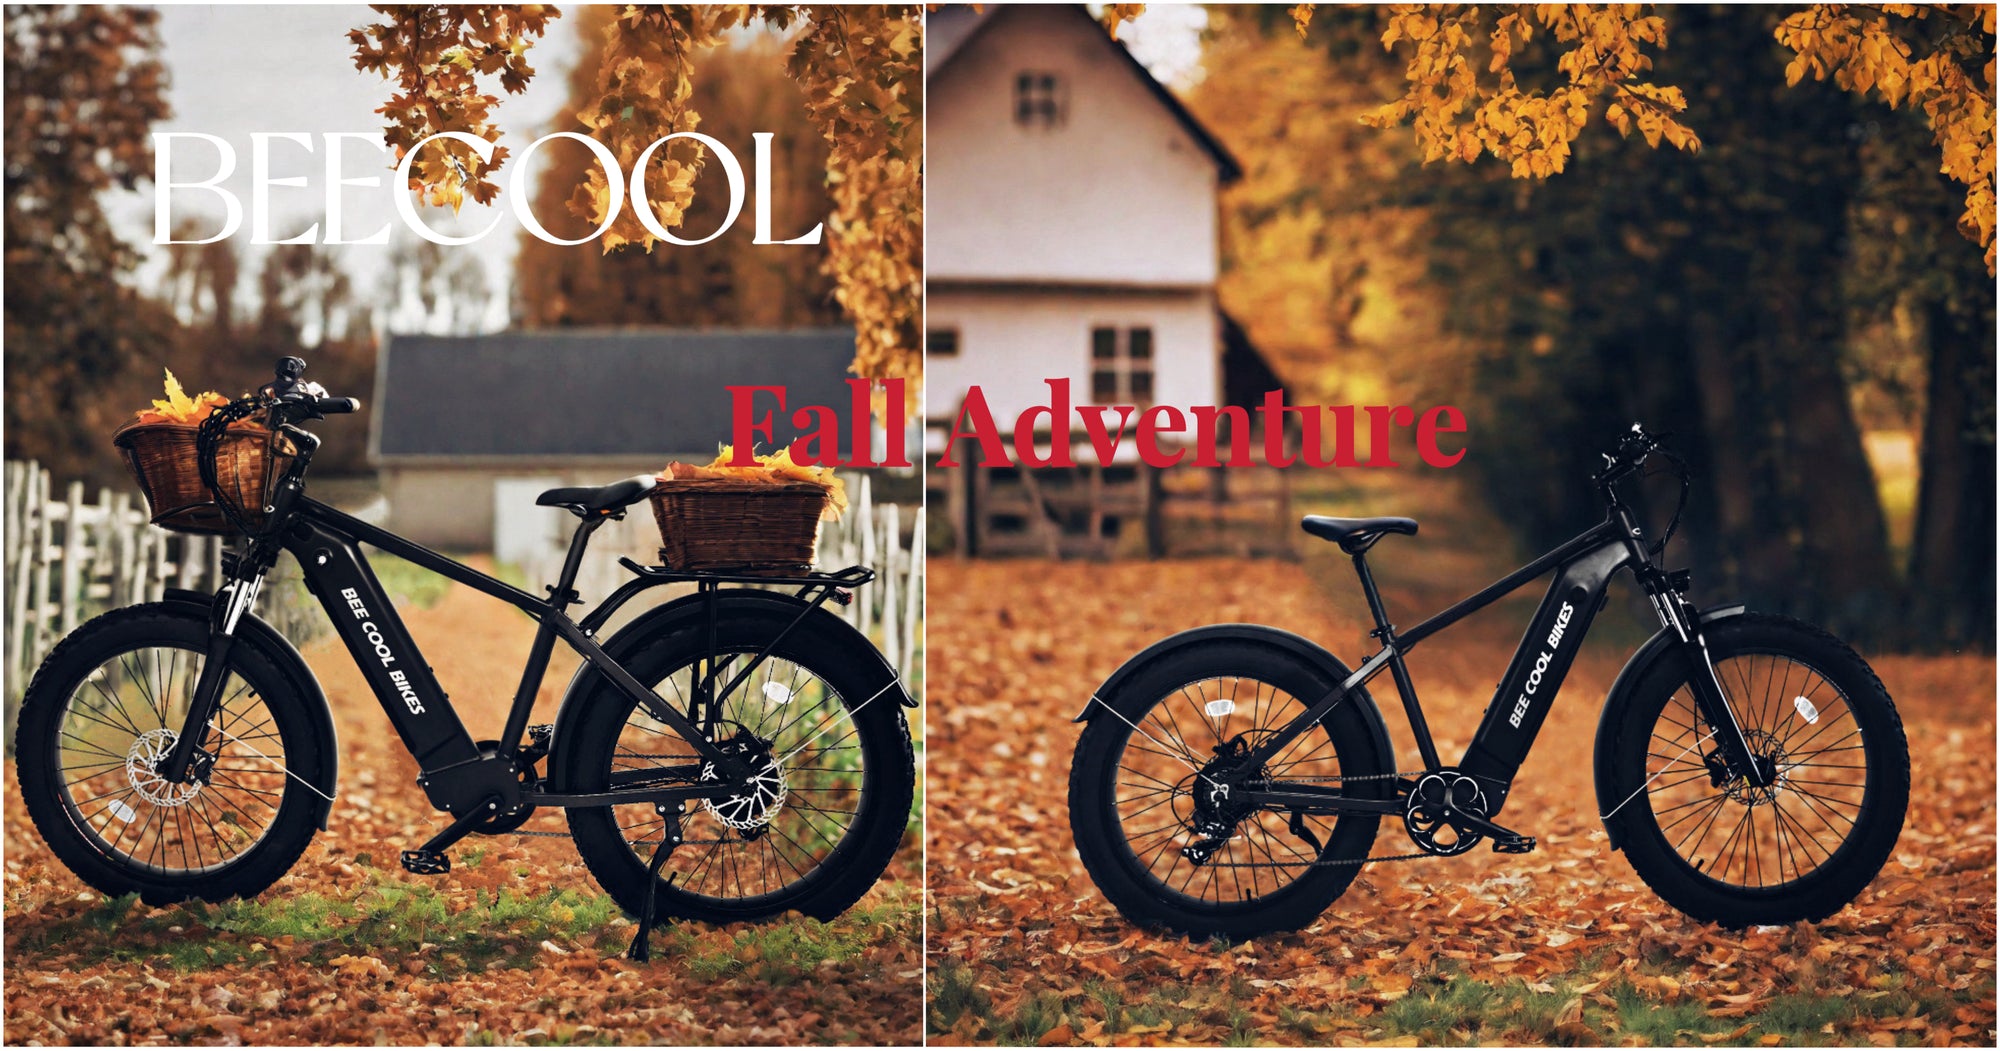 Experience the Ultimate Ride with BeeCool Bikes' Bee Pathfinder Ebike